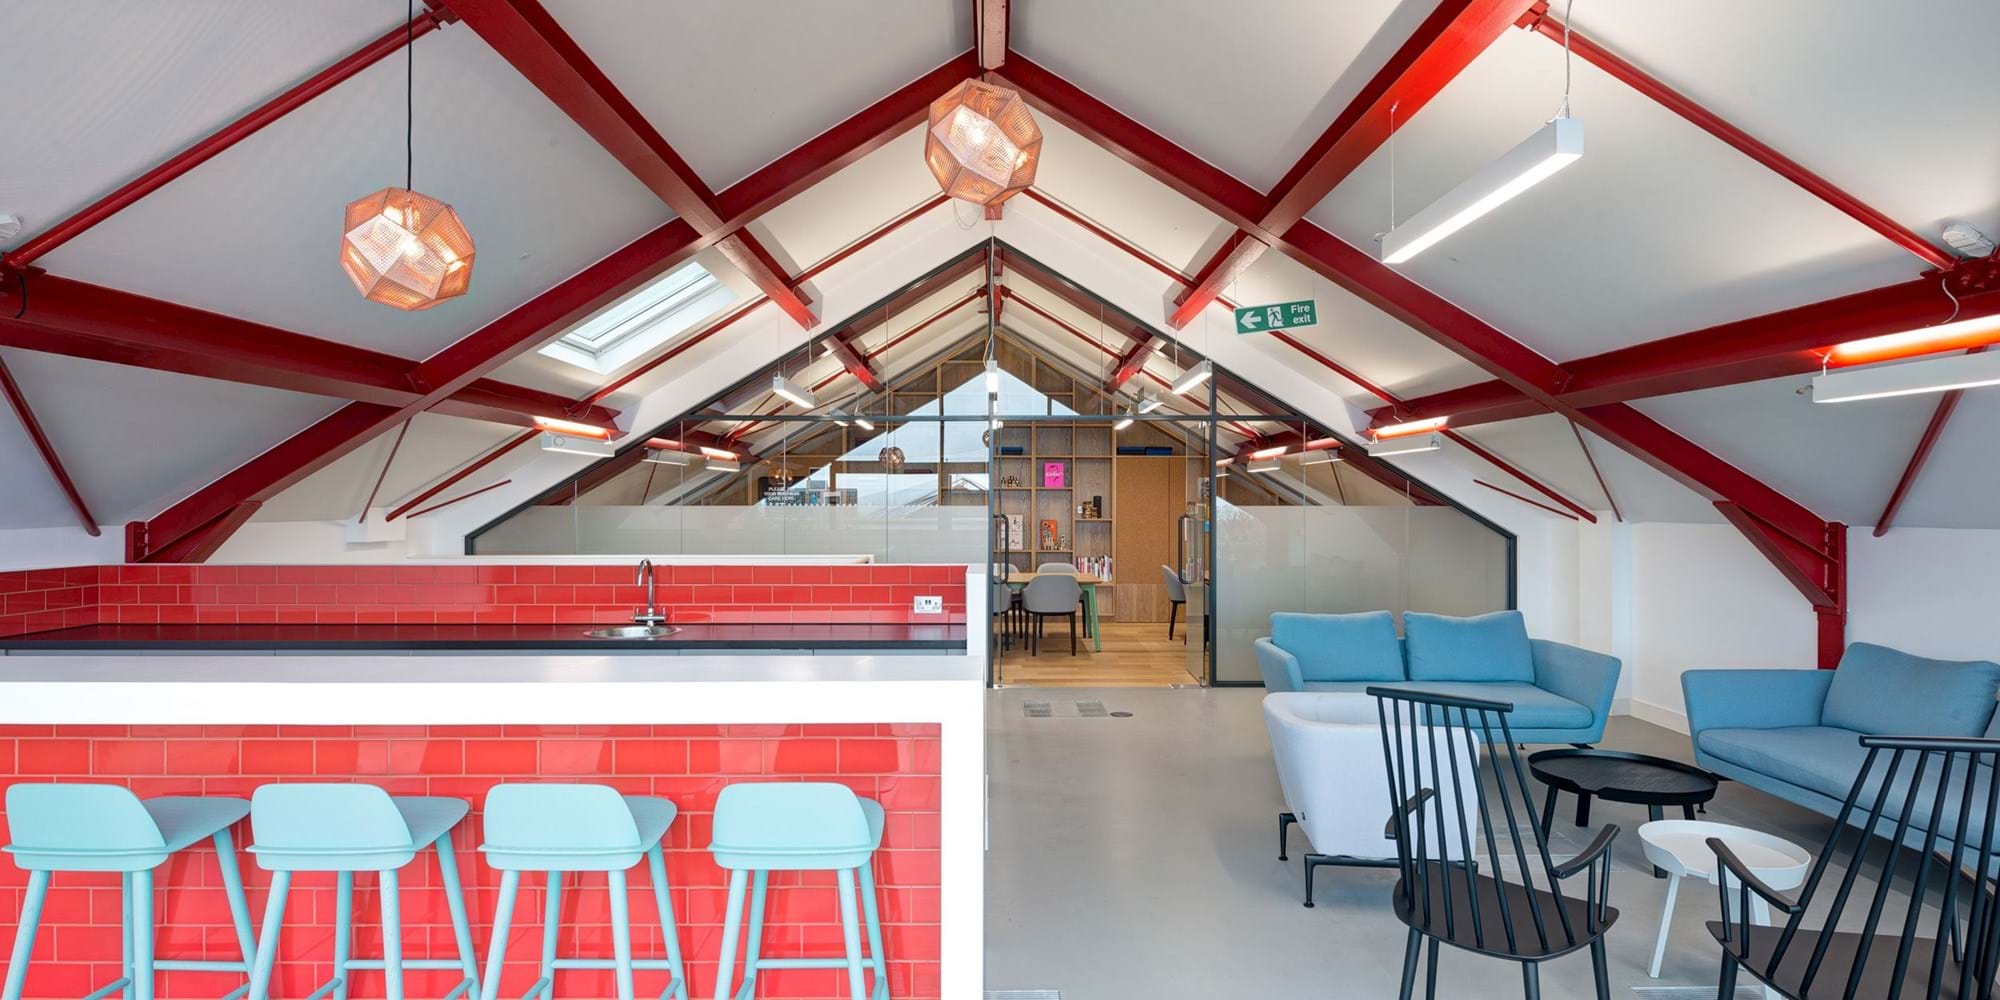 Modus Workspace office design, fit out and refurbishment - Spaces - Brighton - Spaces Brighton 29 highres sRGB.jpg